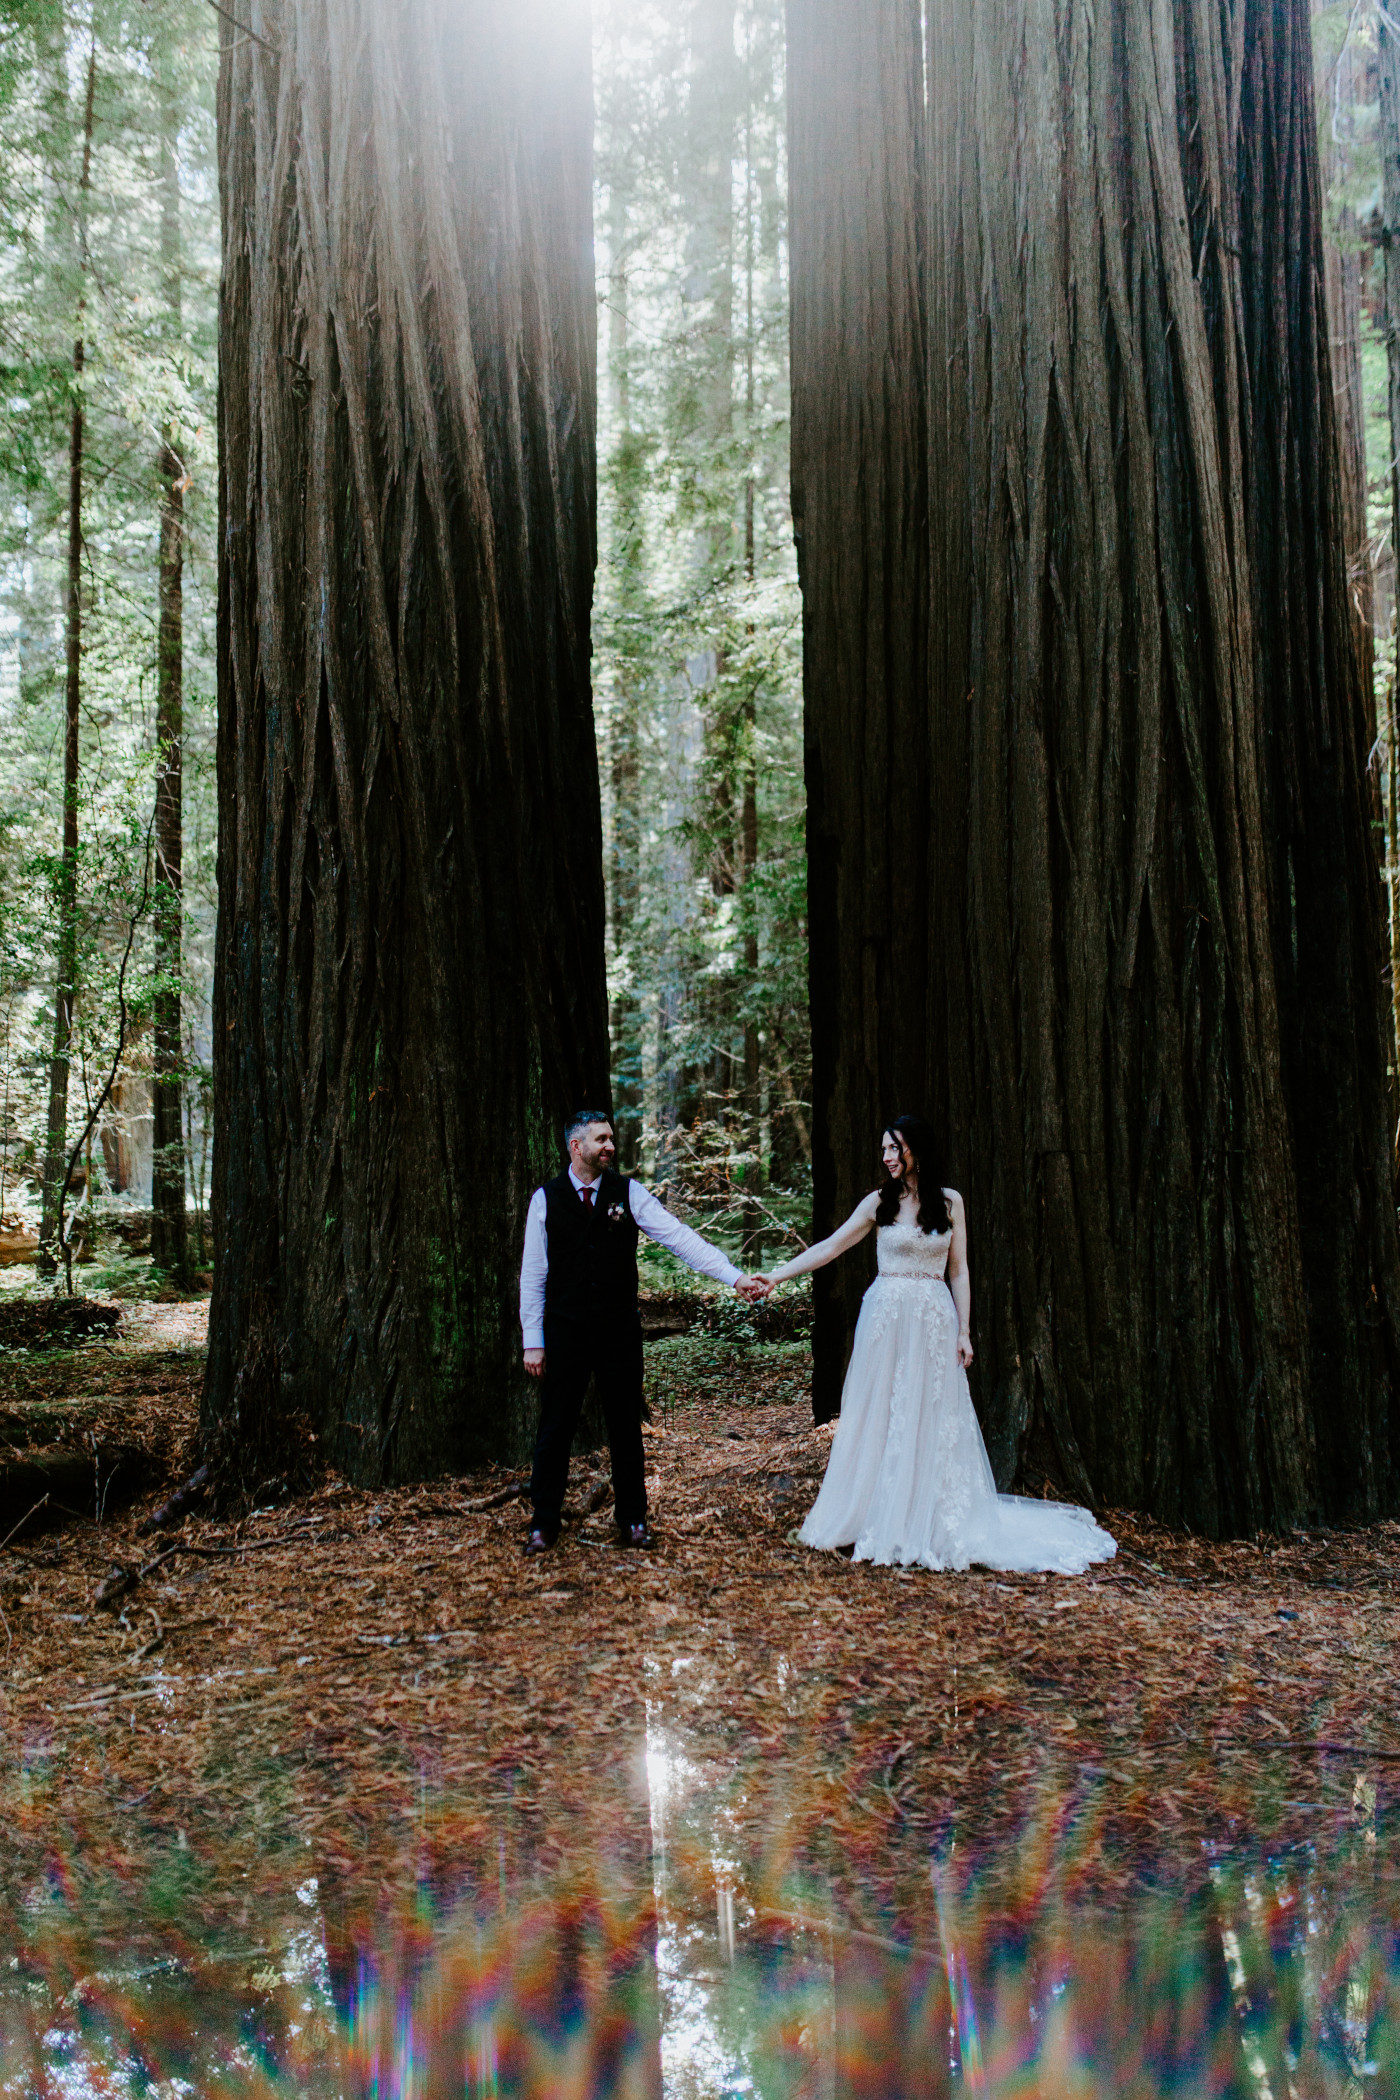 Tim and Hannah hold hands in front of giant redwood trees in the California Redwoods National Park forest.